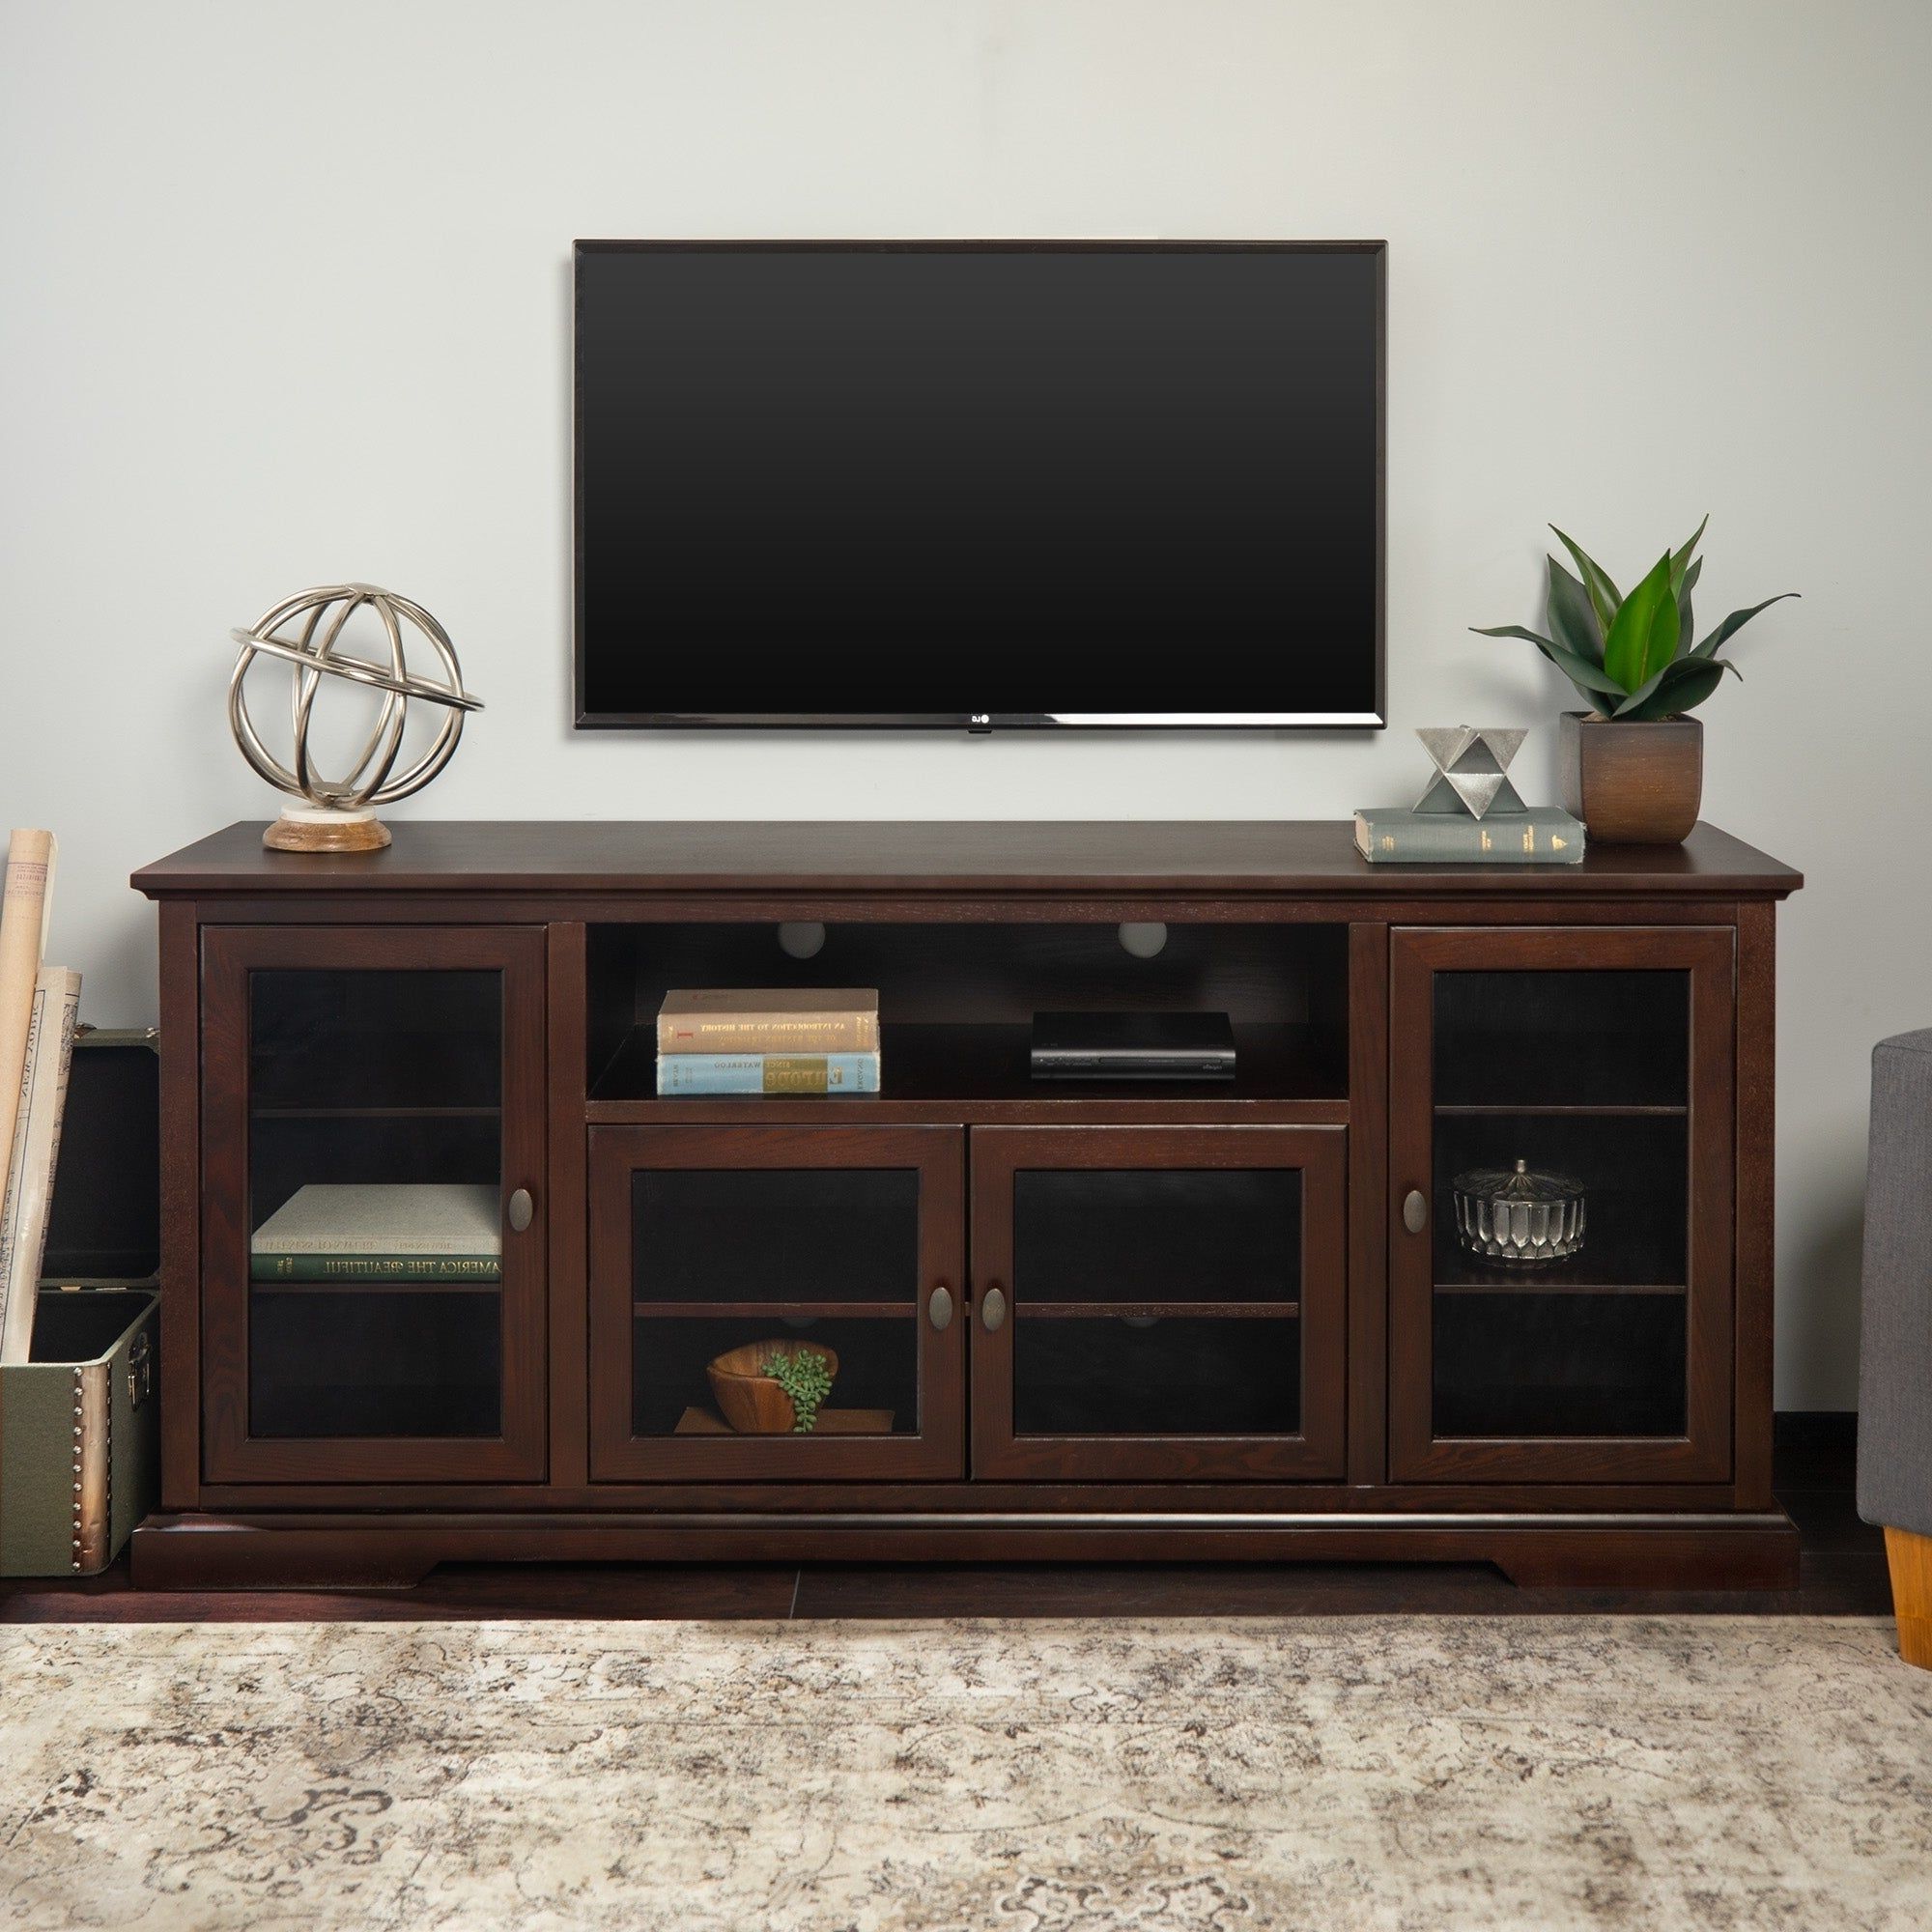 75+ T V Stand – はもながめ Regarding Mainstays 3 Door Tv Stands Console In Multiple Colors (Gallery 18 of 20)